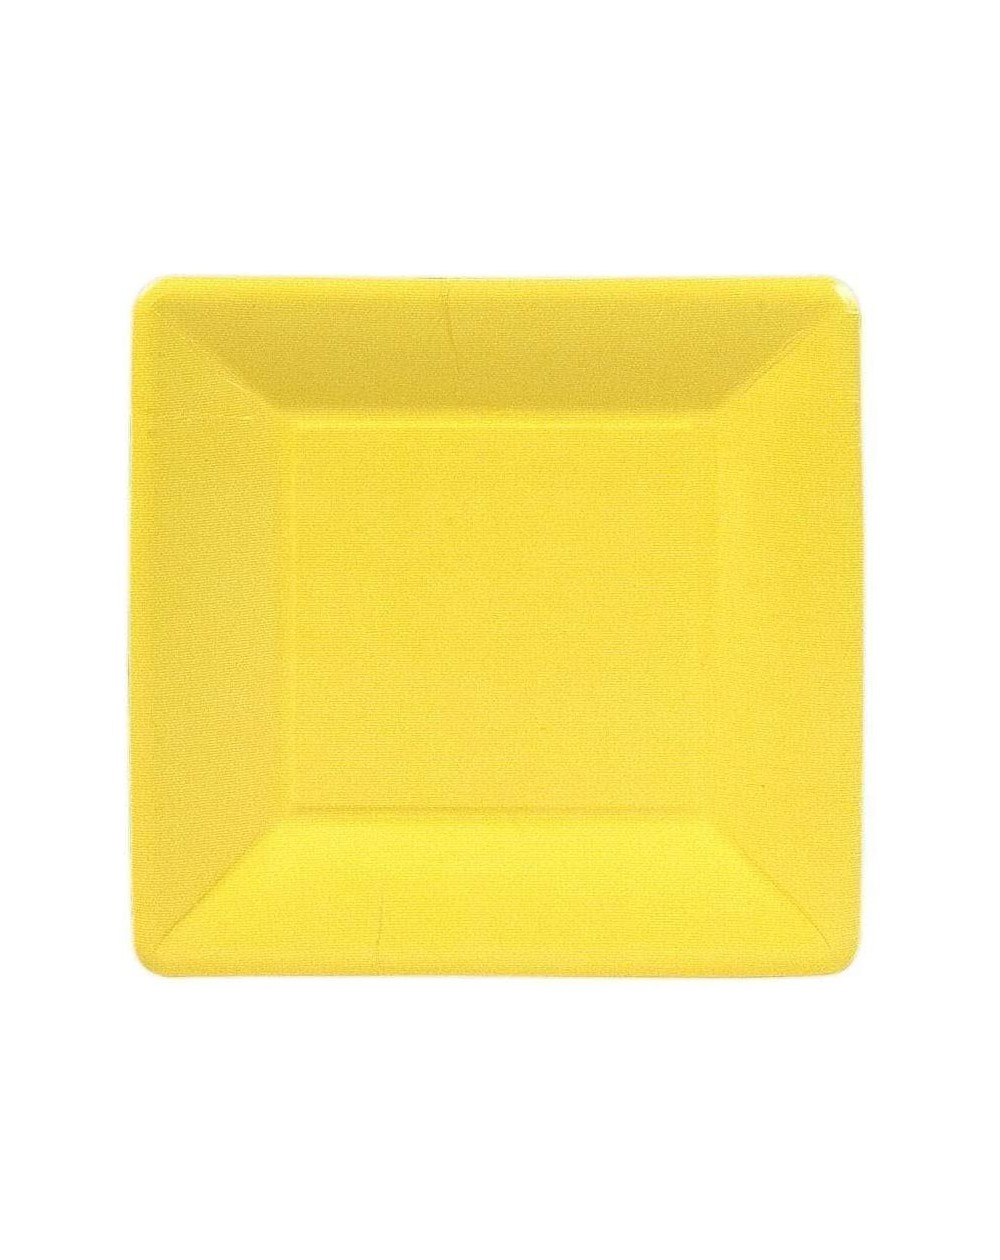 Tableware Grosgrain Square Paper Salad & Dessert Plates in Yellow- Pack of 8 - Yellow - CL113F5AJDL $18.32